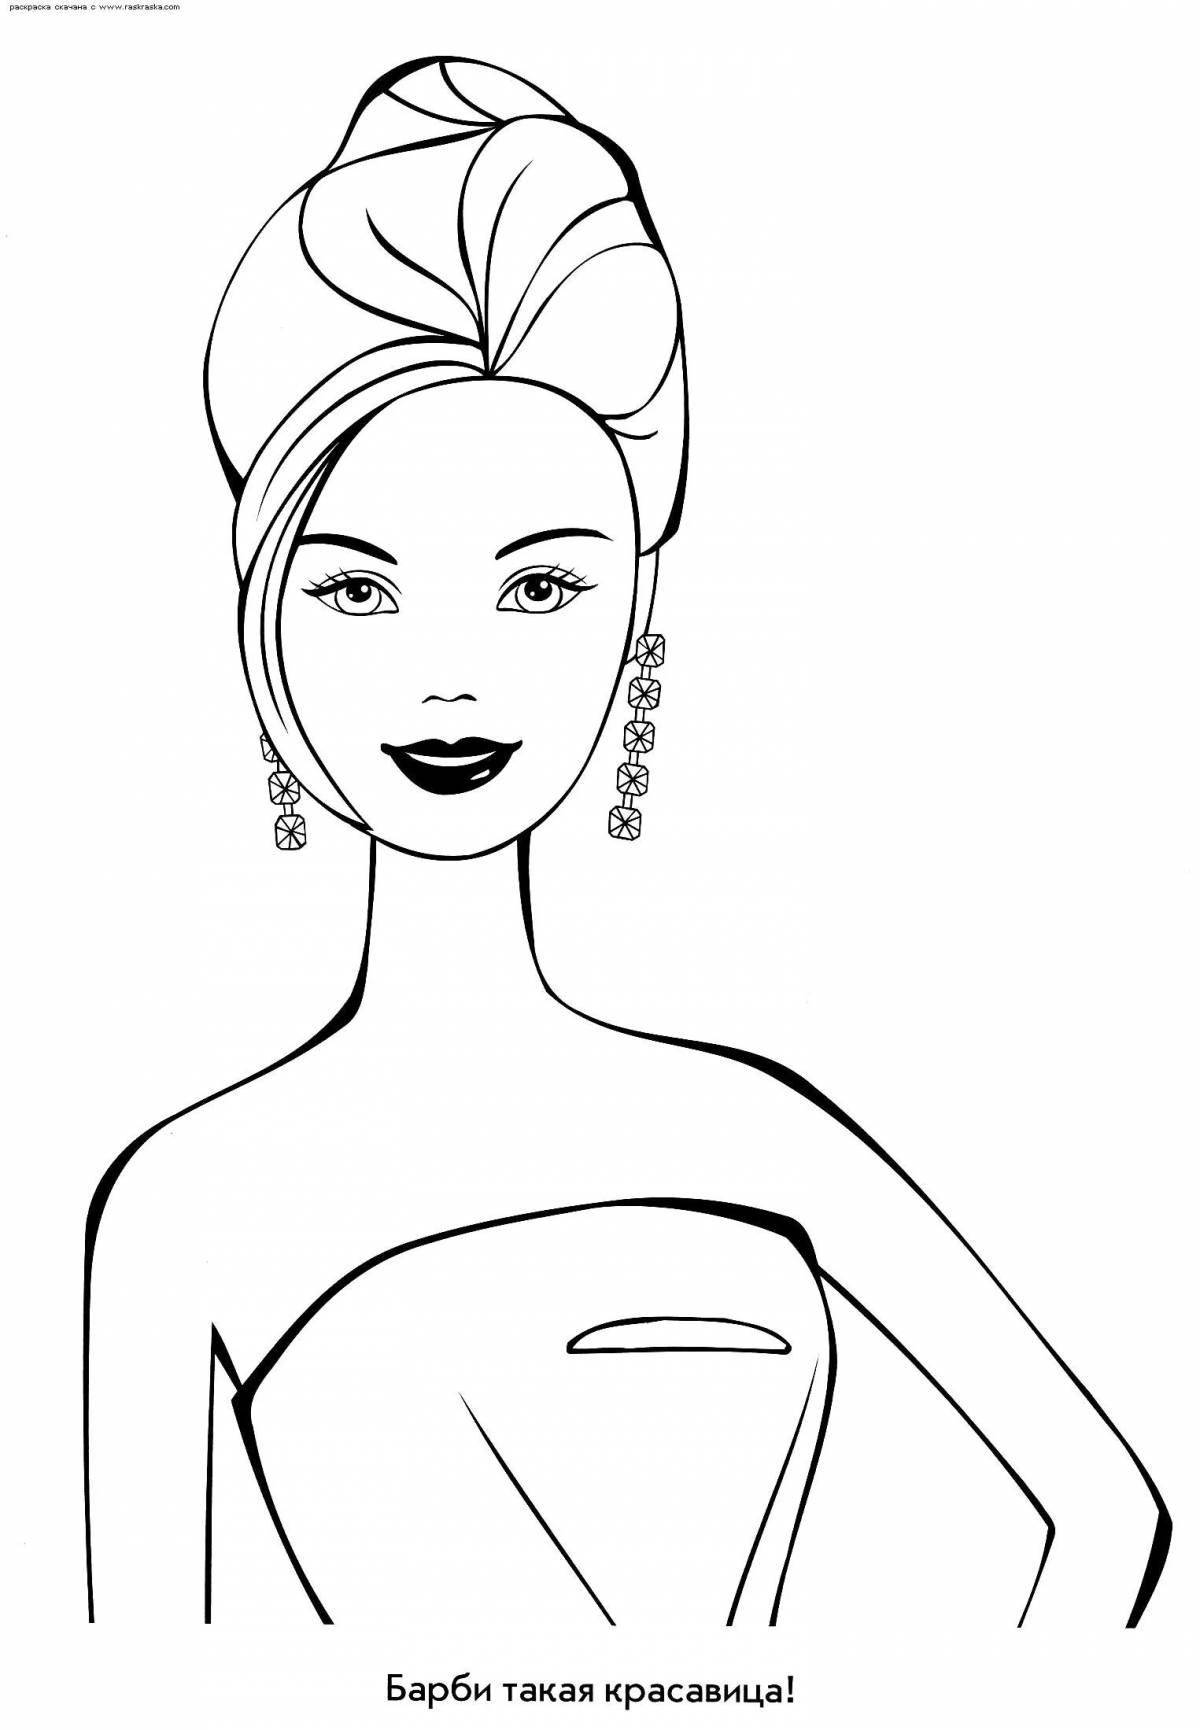 Playful barbie face coloring page